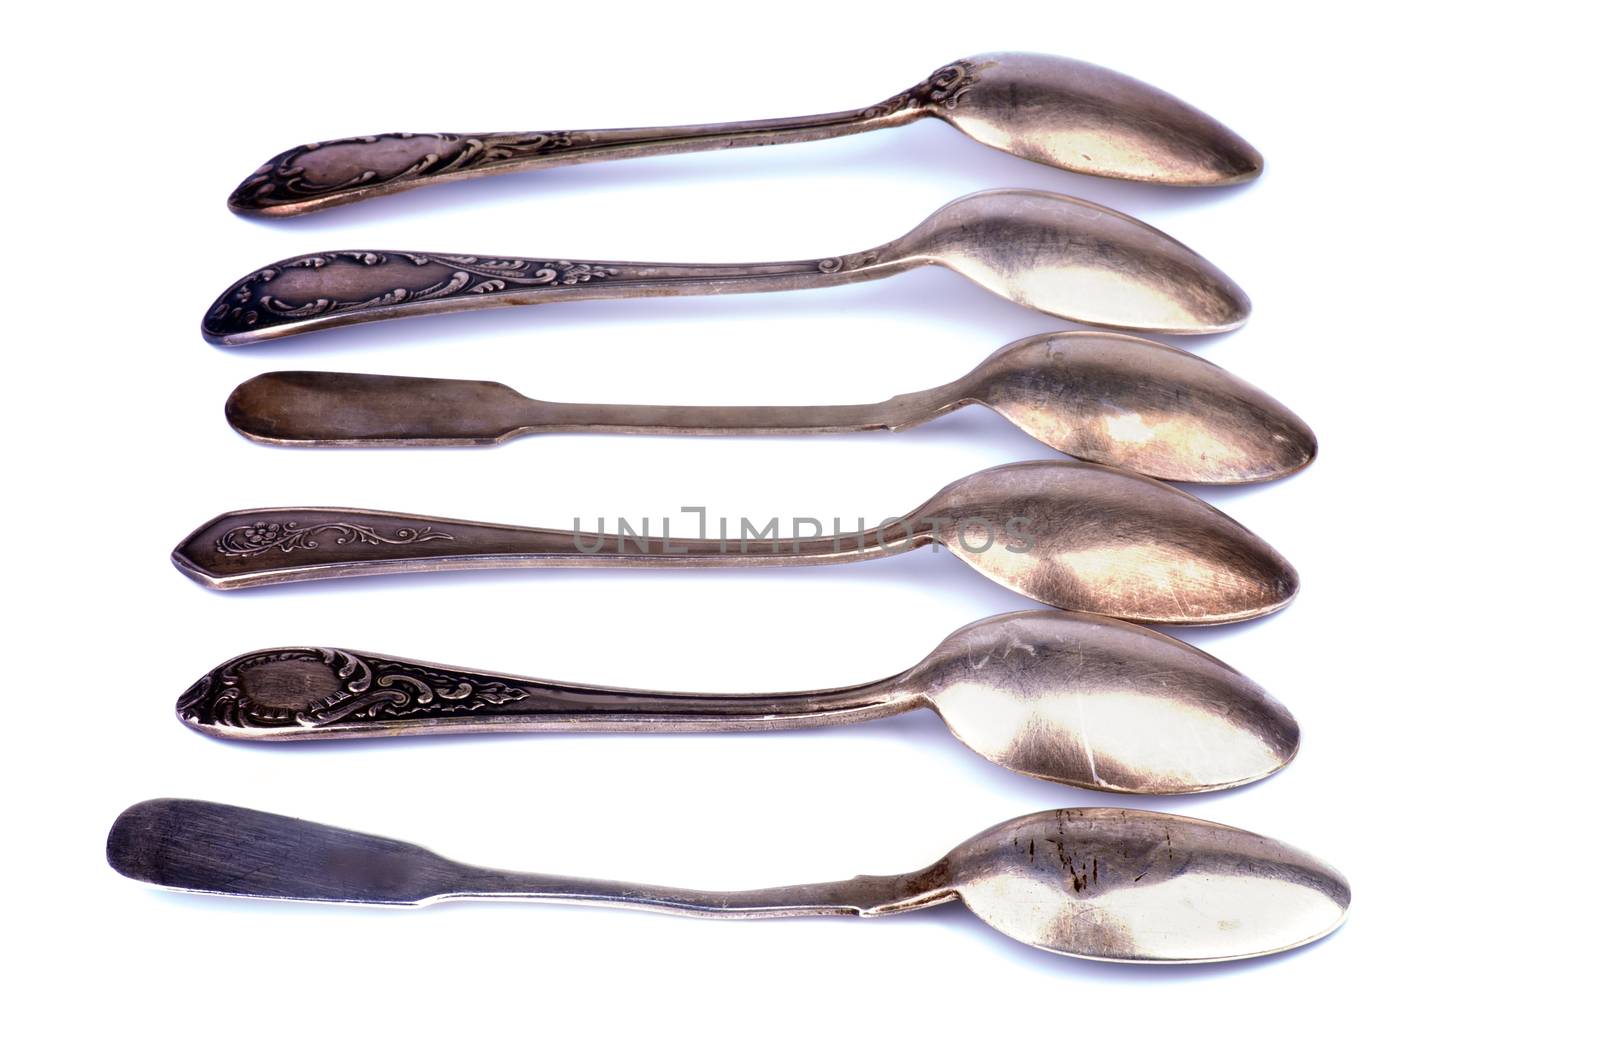 Arrangement of Old Silver Spoons In a Row isolated on white background